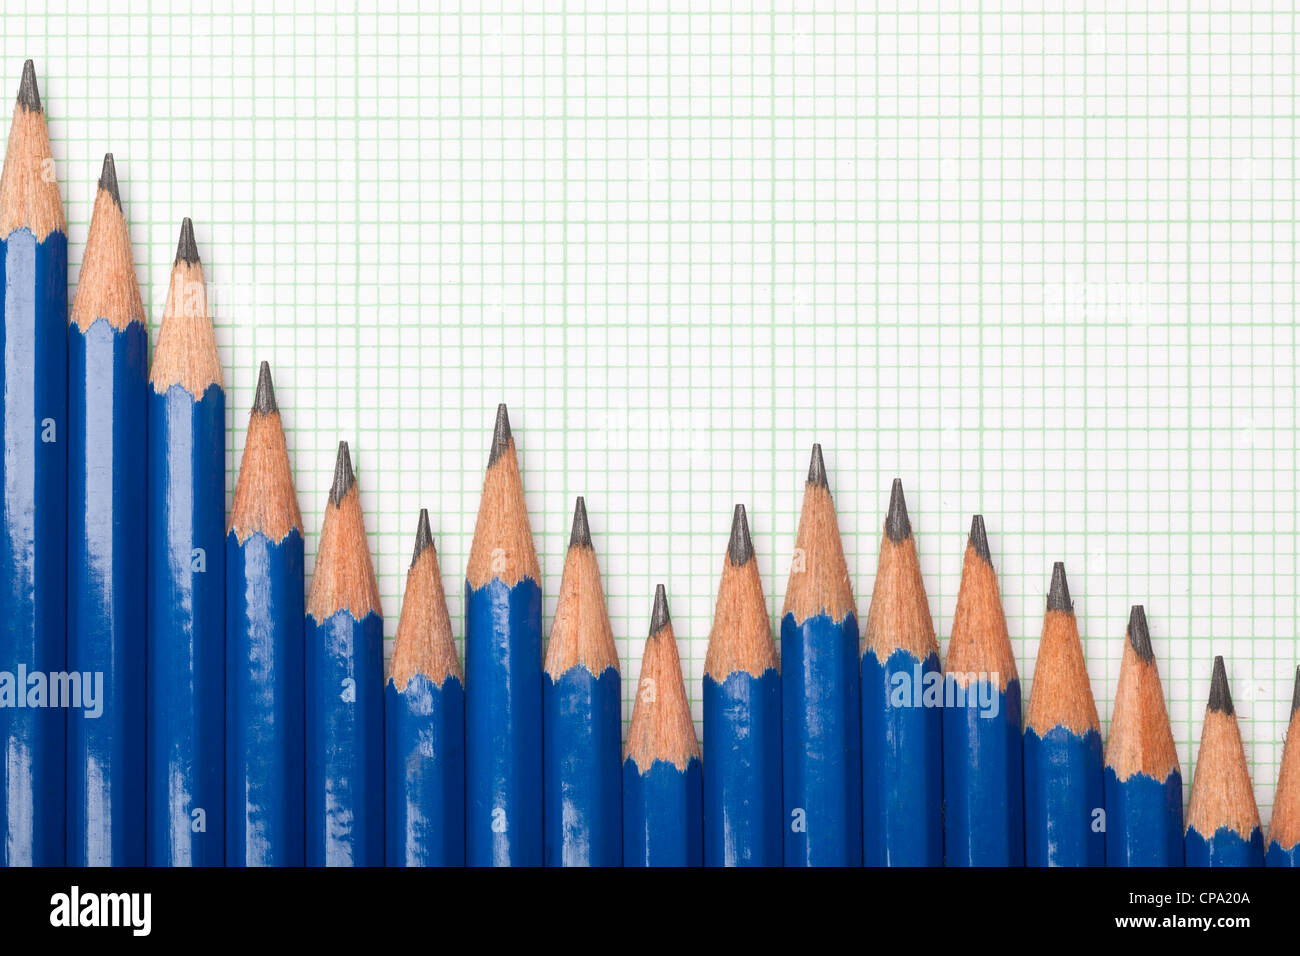 Pencils forming a downtrend chart on graph paper Stock Photo